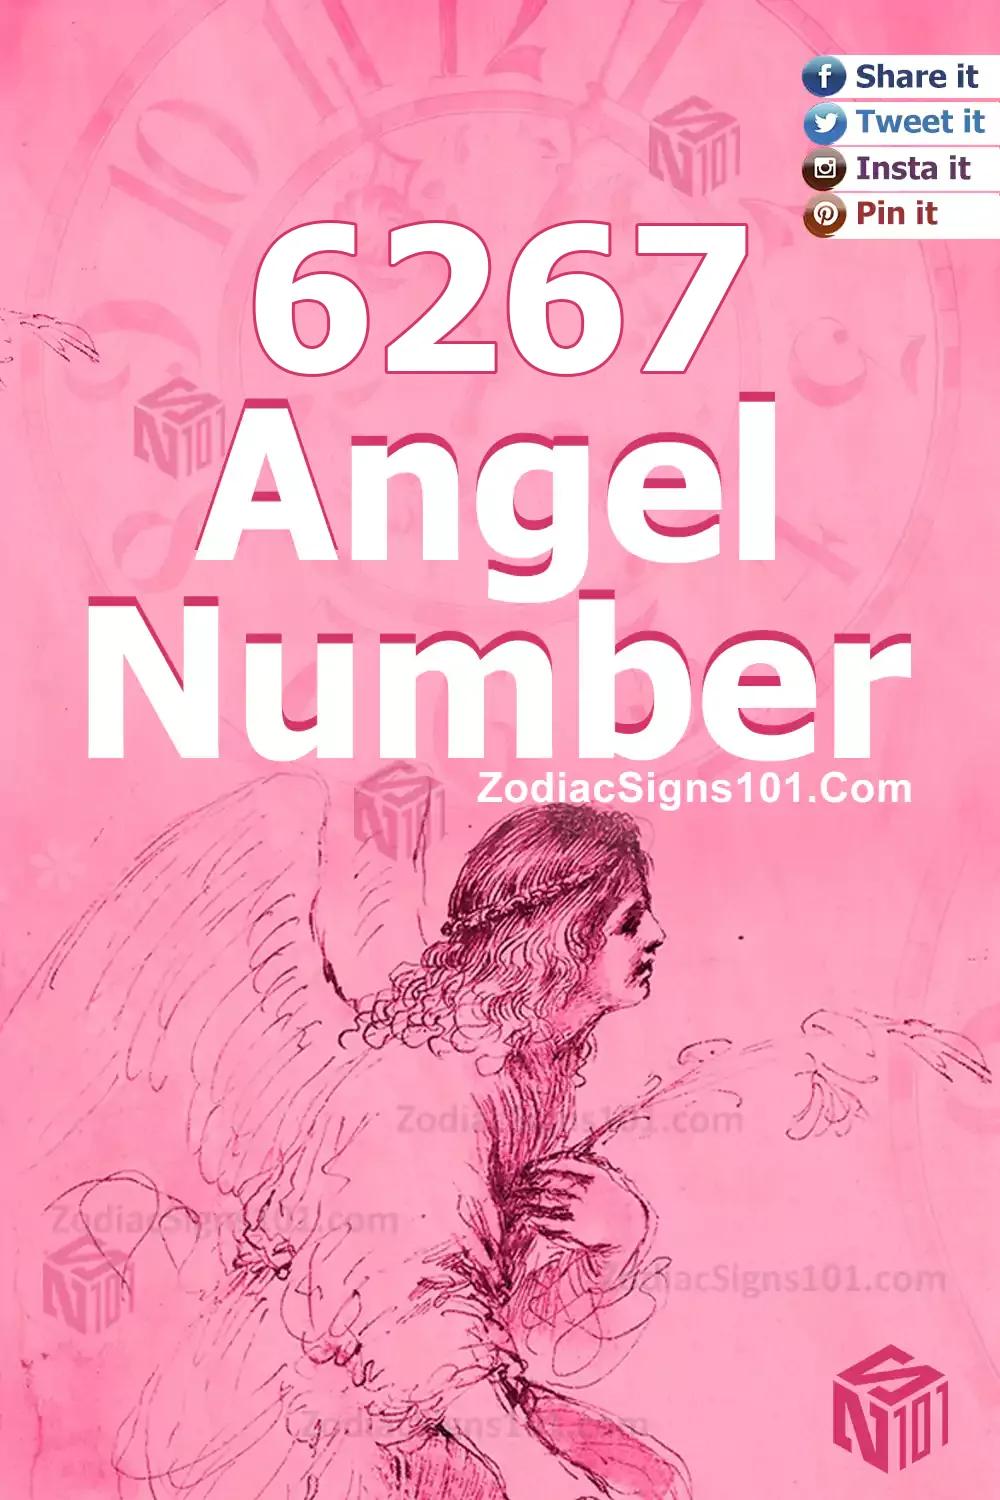 6267 Angel Number Meaning